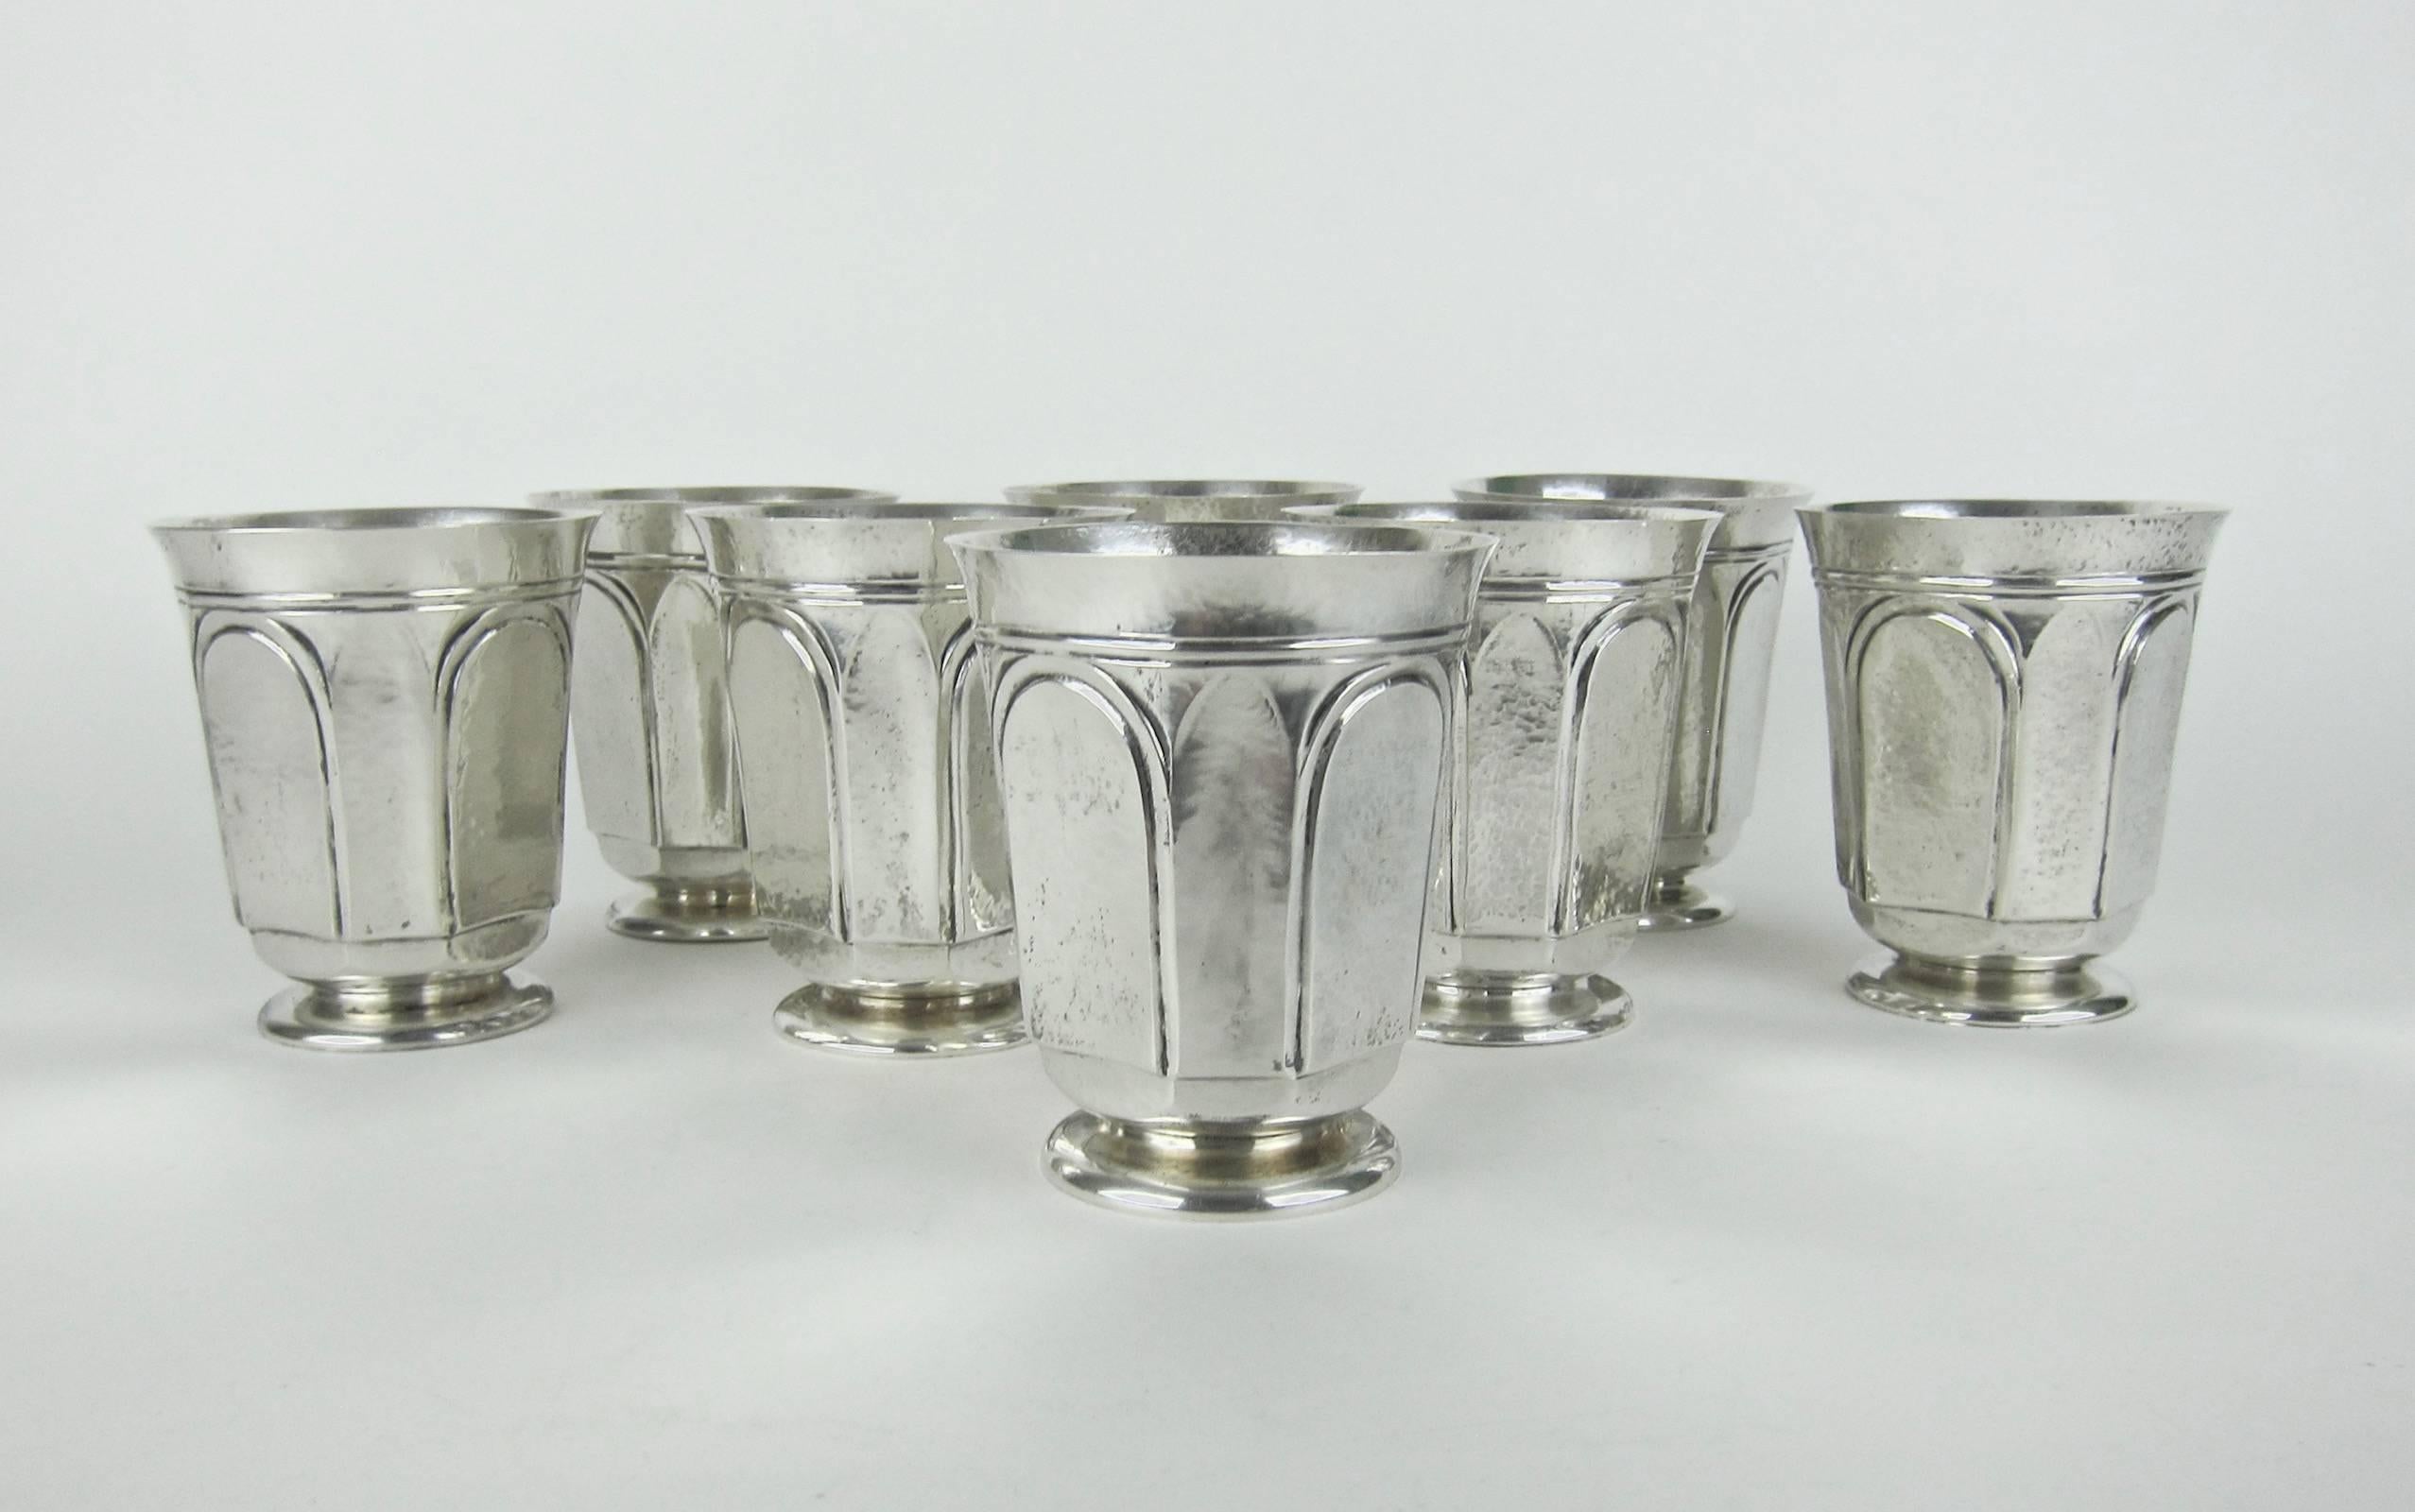 Hammered Heavy Sterling Silver Tumblers or Julep Cups by Marie Zimmermann, circa 1915 For Sale